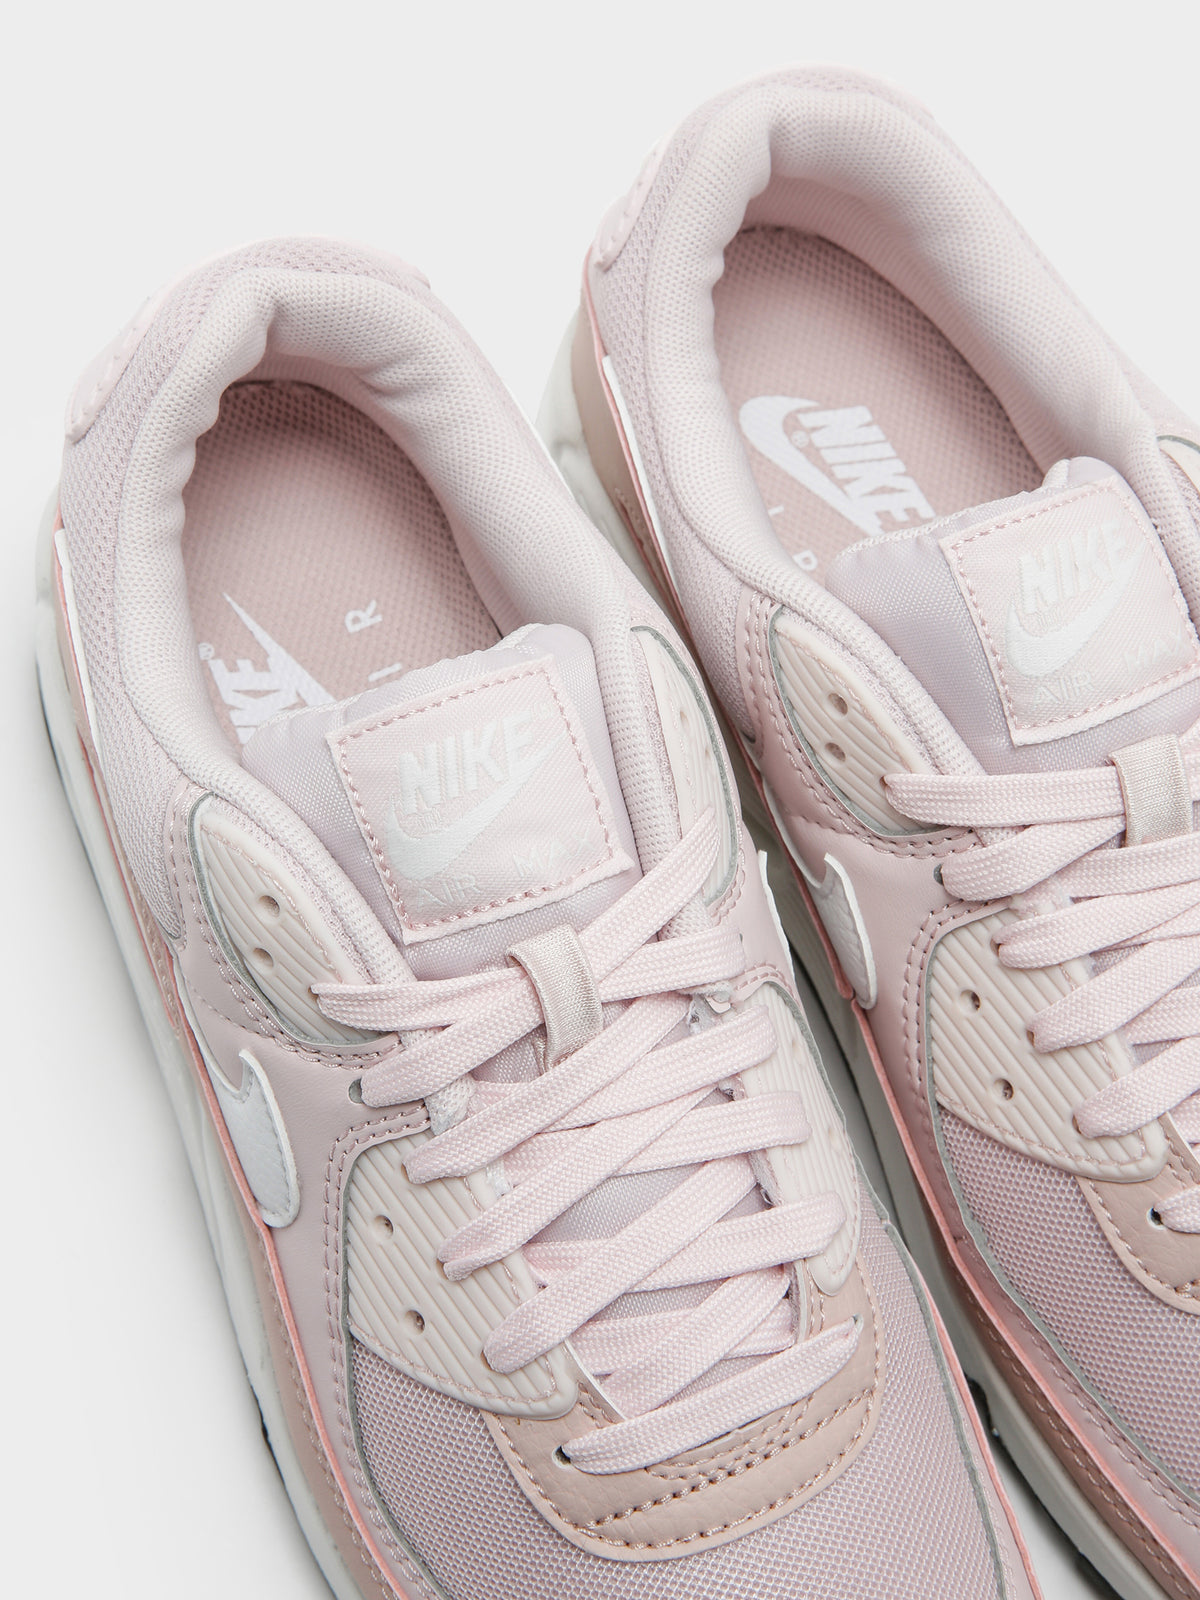 Womens Air Max 90 Sneakers in Pink &amp; White